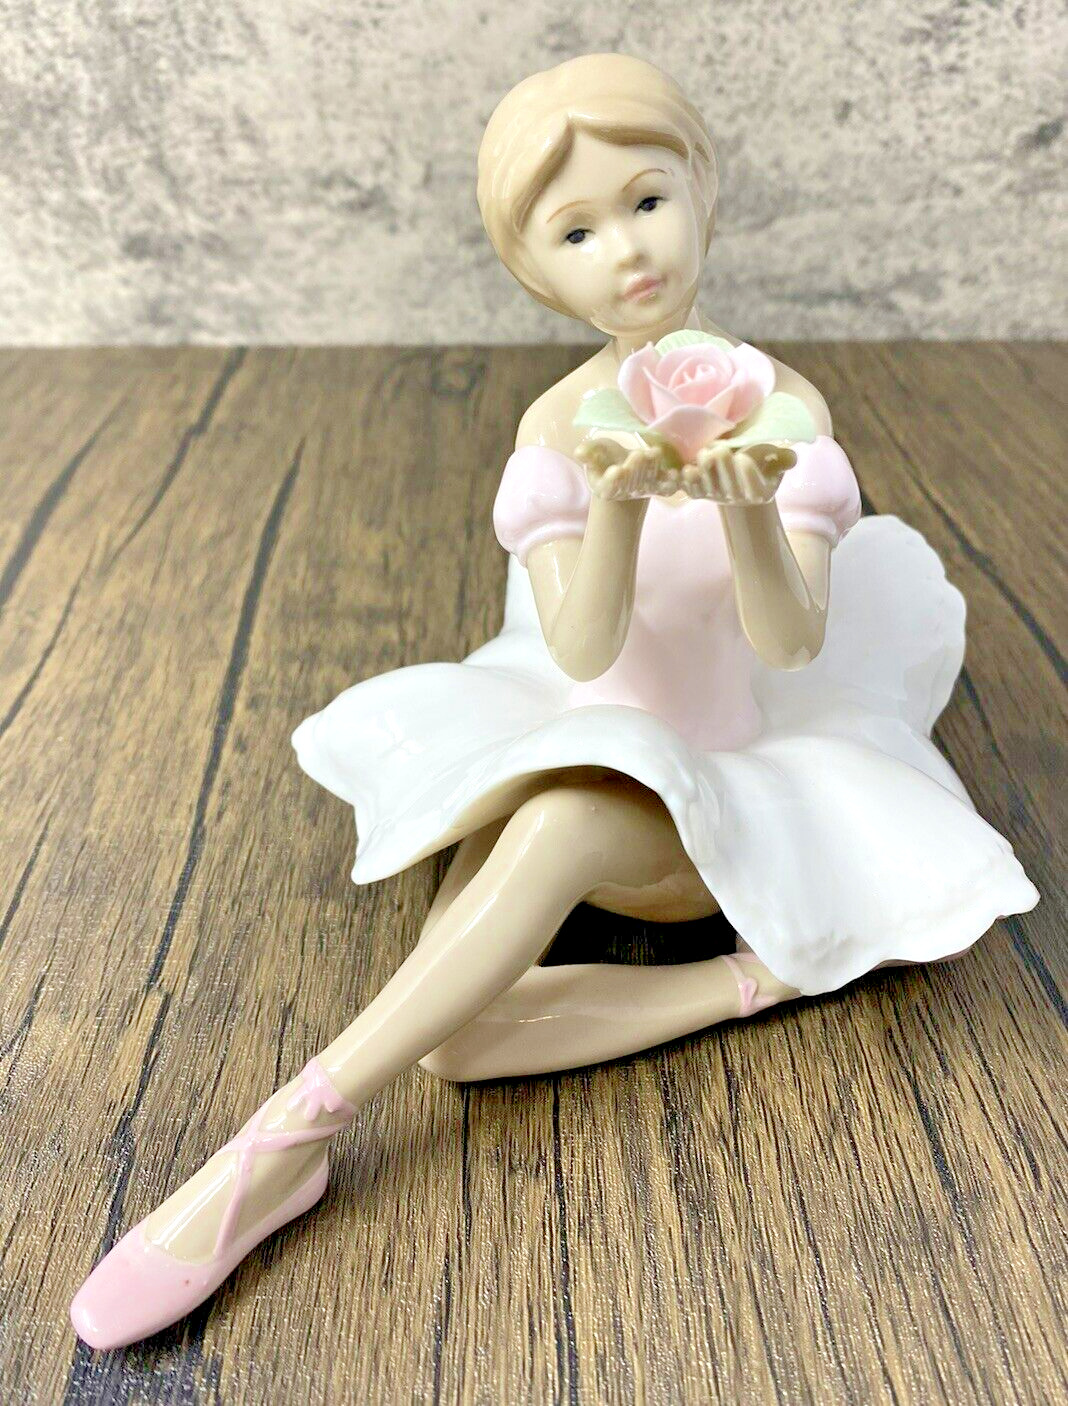 Pretty Porcelain VINTAGE Ballerina Figurine Pink Rose Flowers Glossy Perfect Con